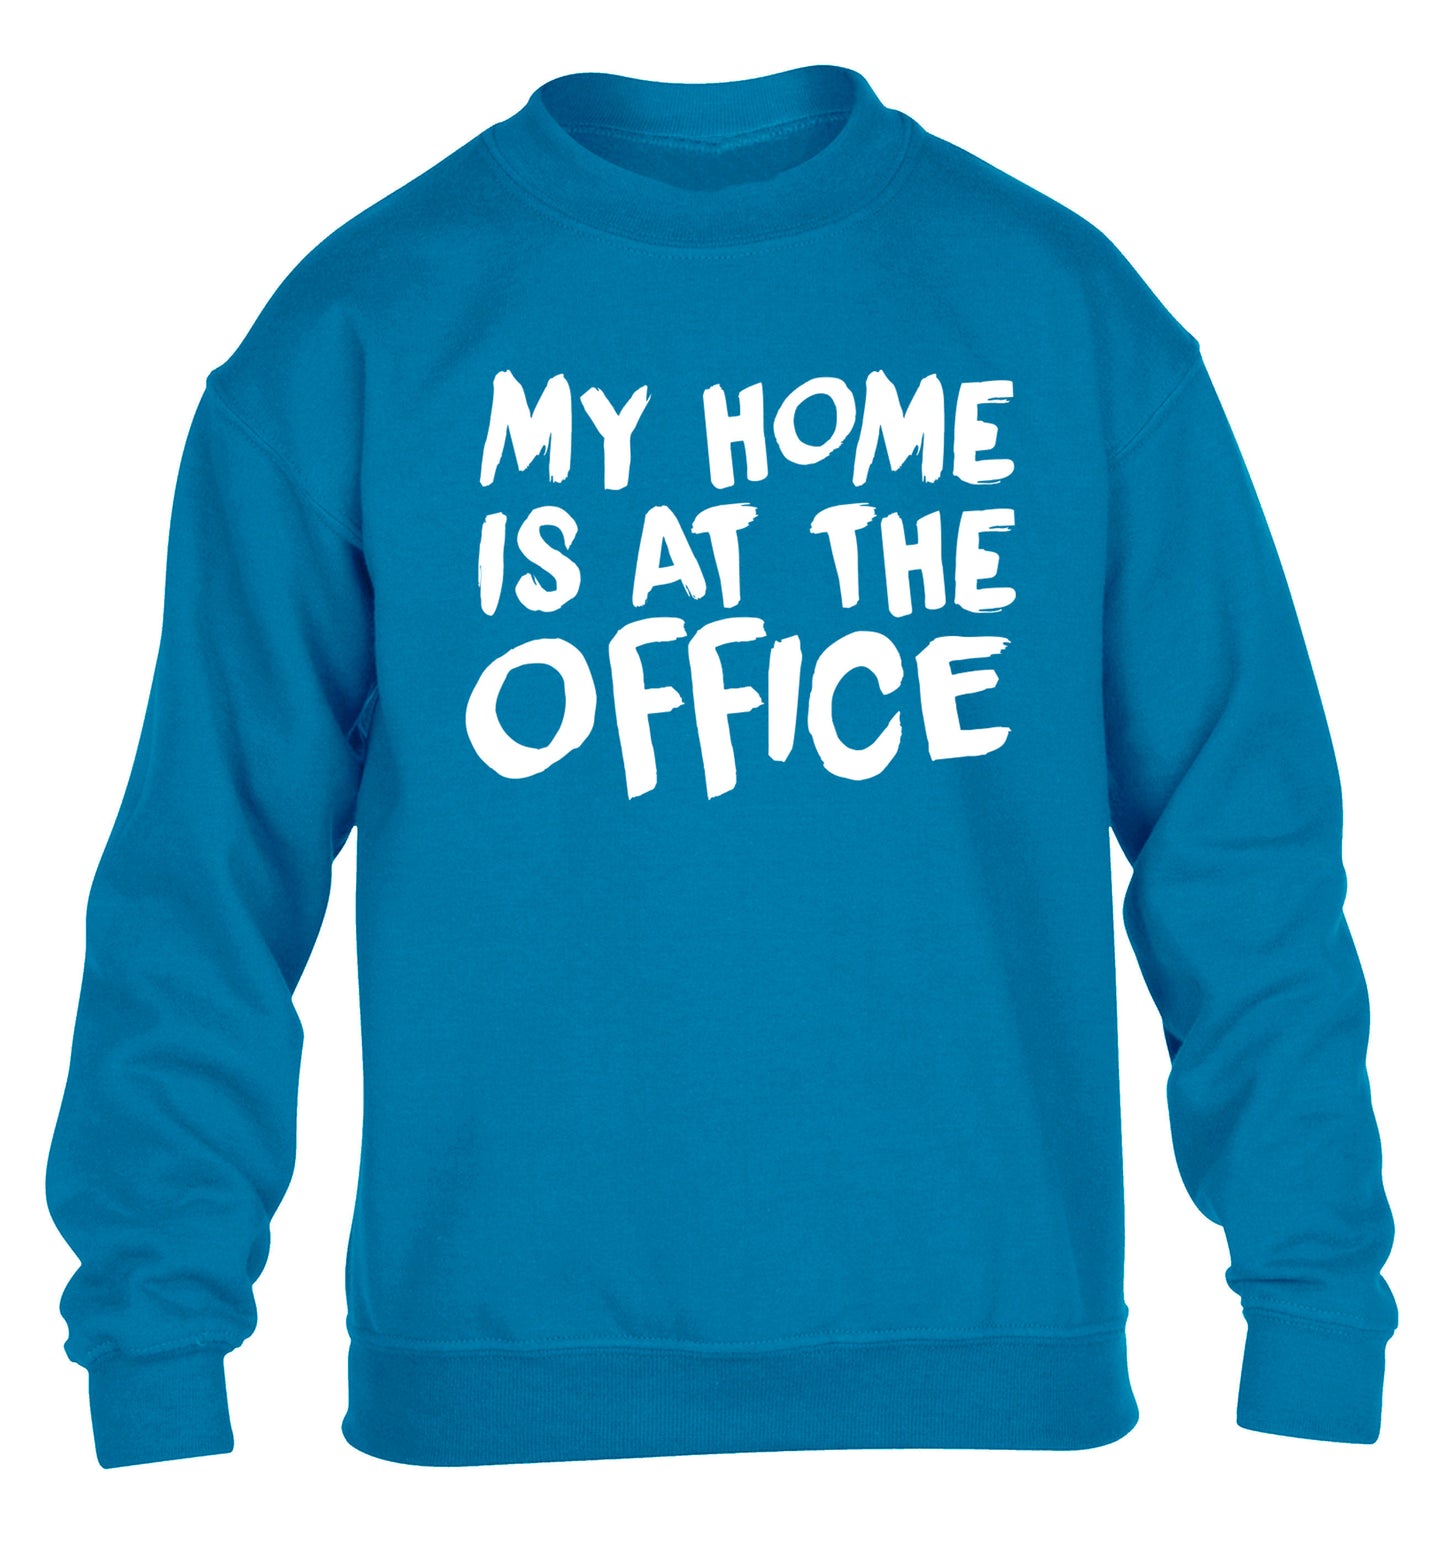 My home is at the office children's blue sweater 12-14 Years